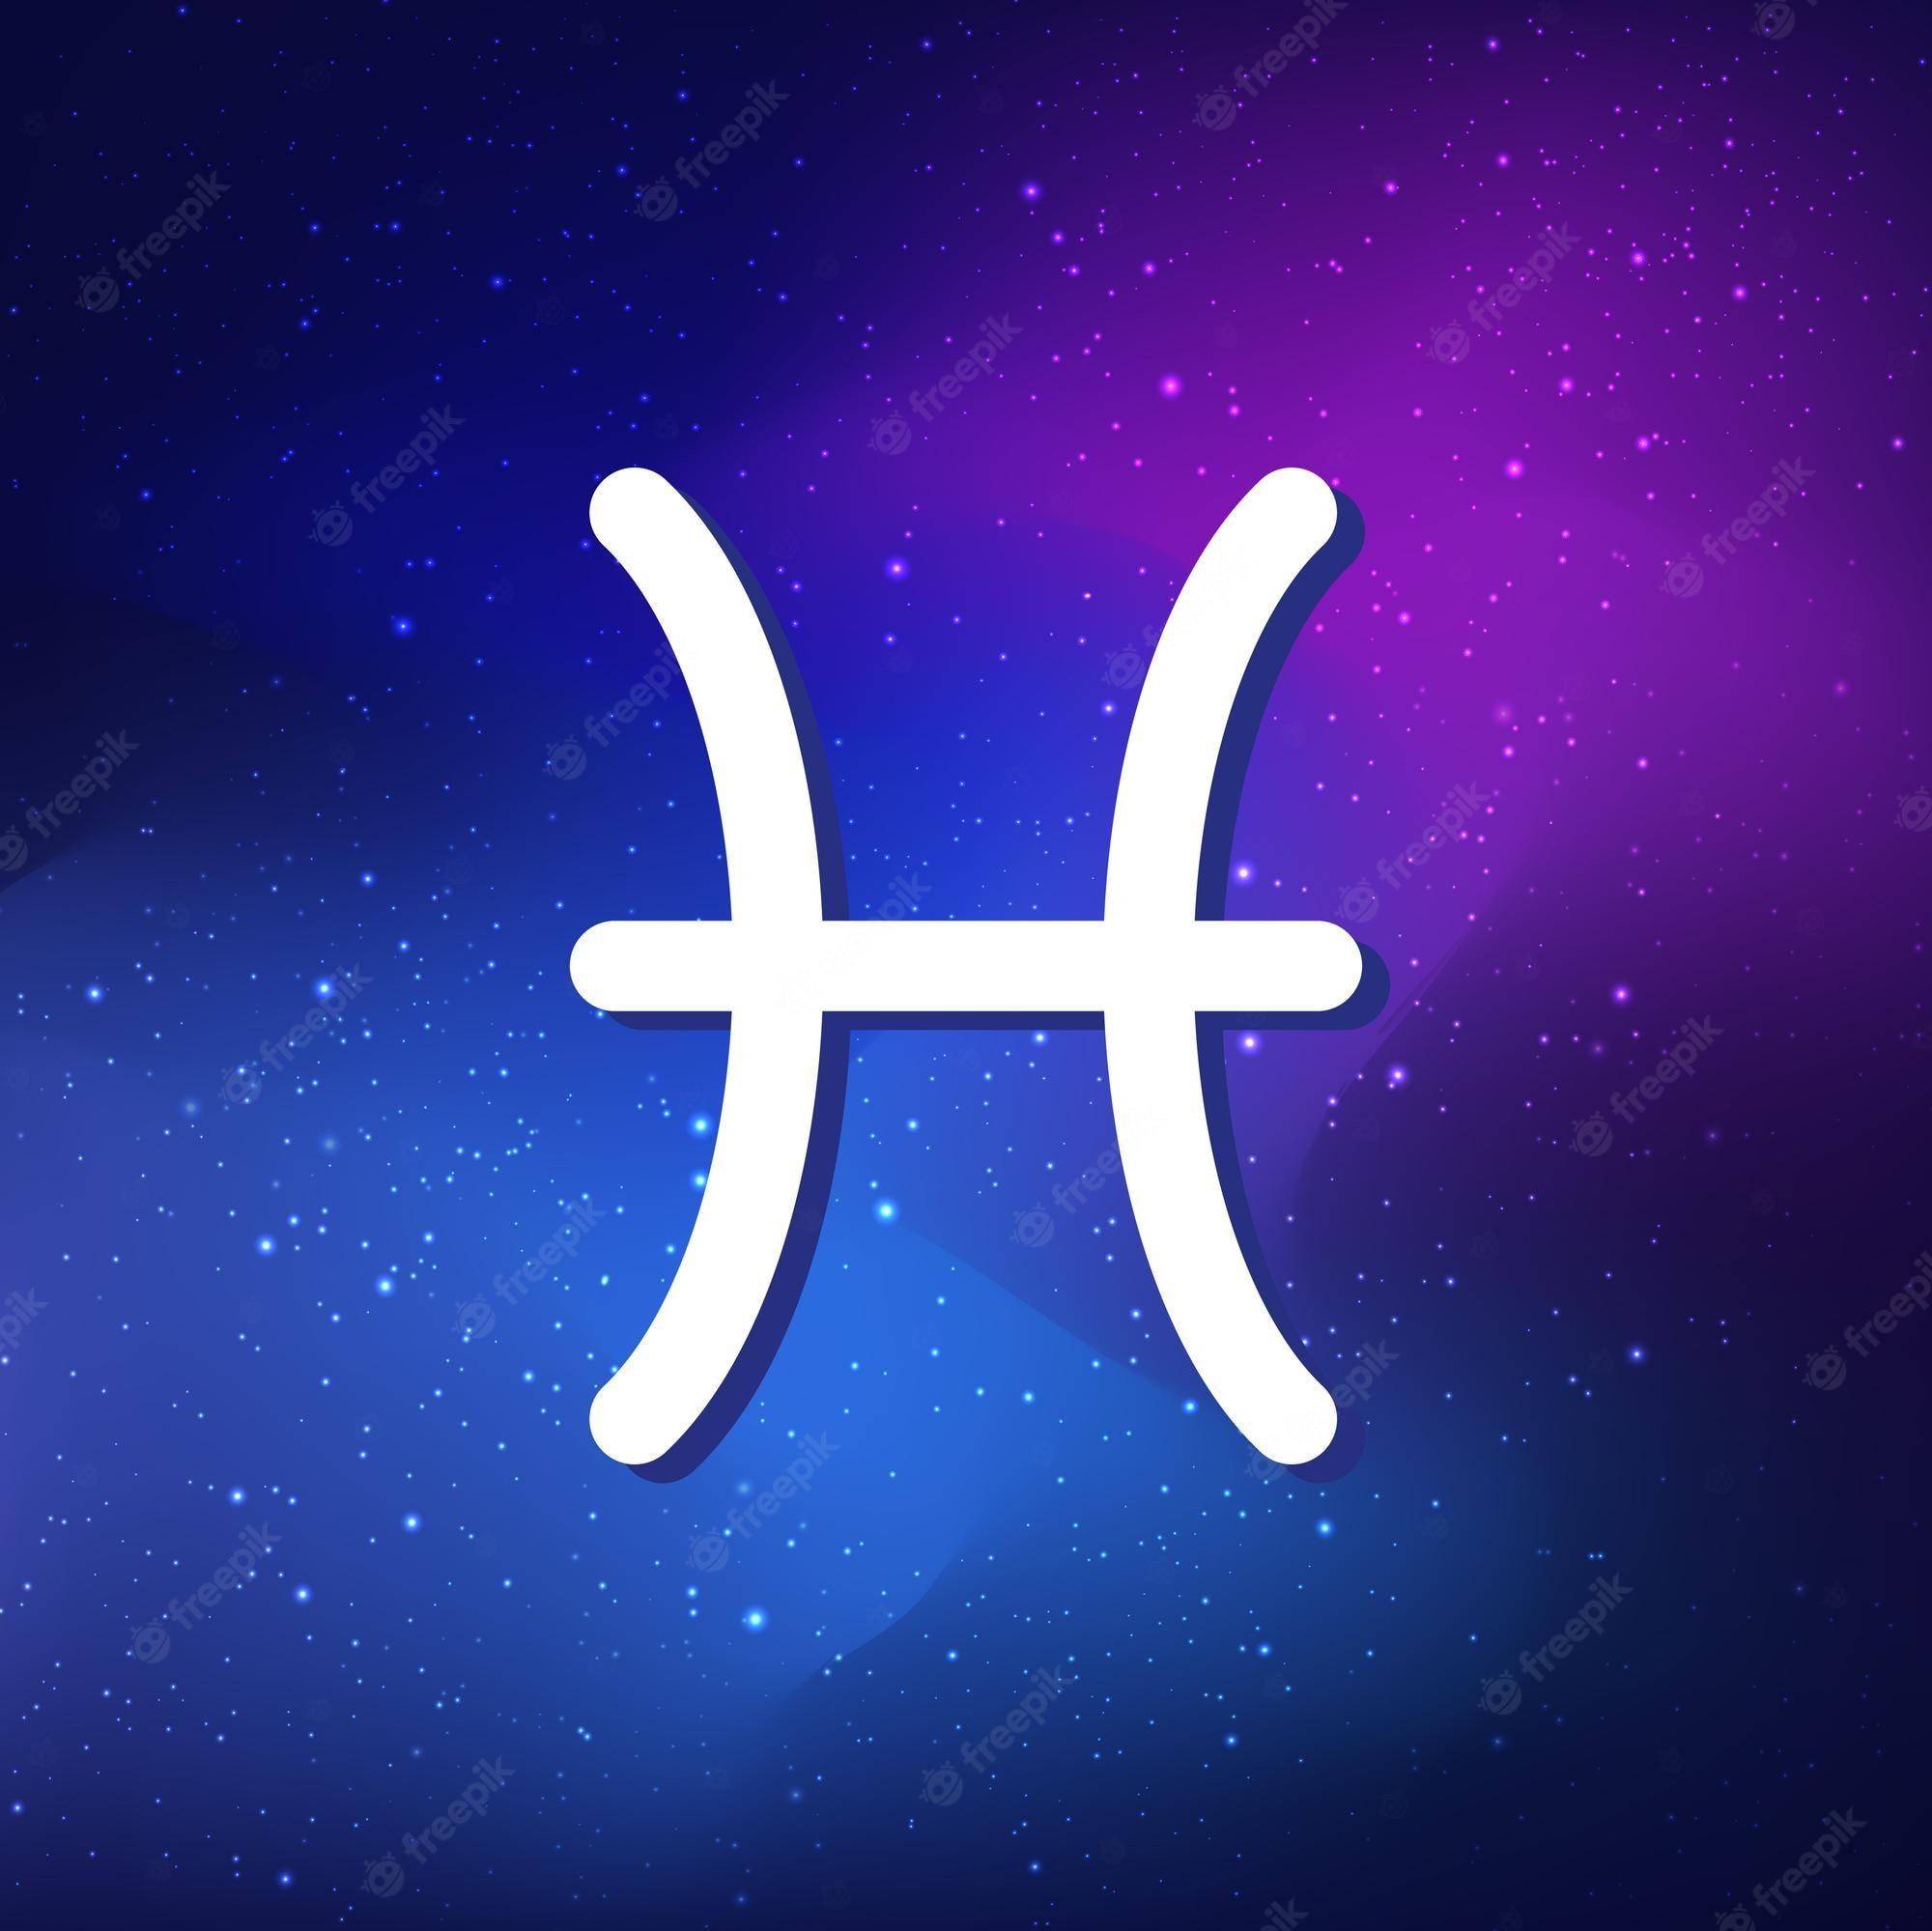 Premium Vector Pisces Zodiac Sign Abstract Night Sky Background